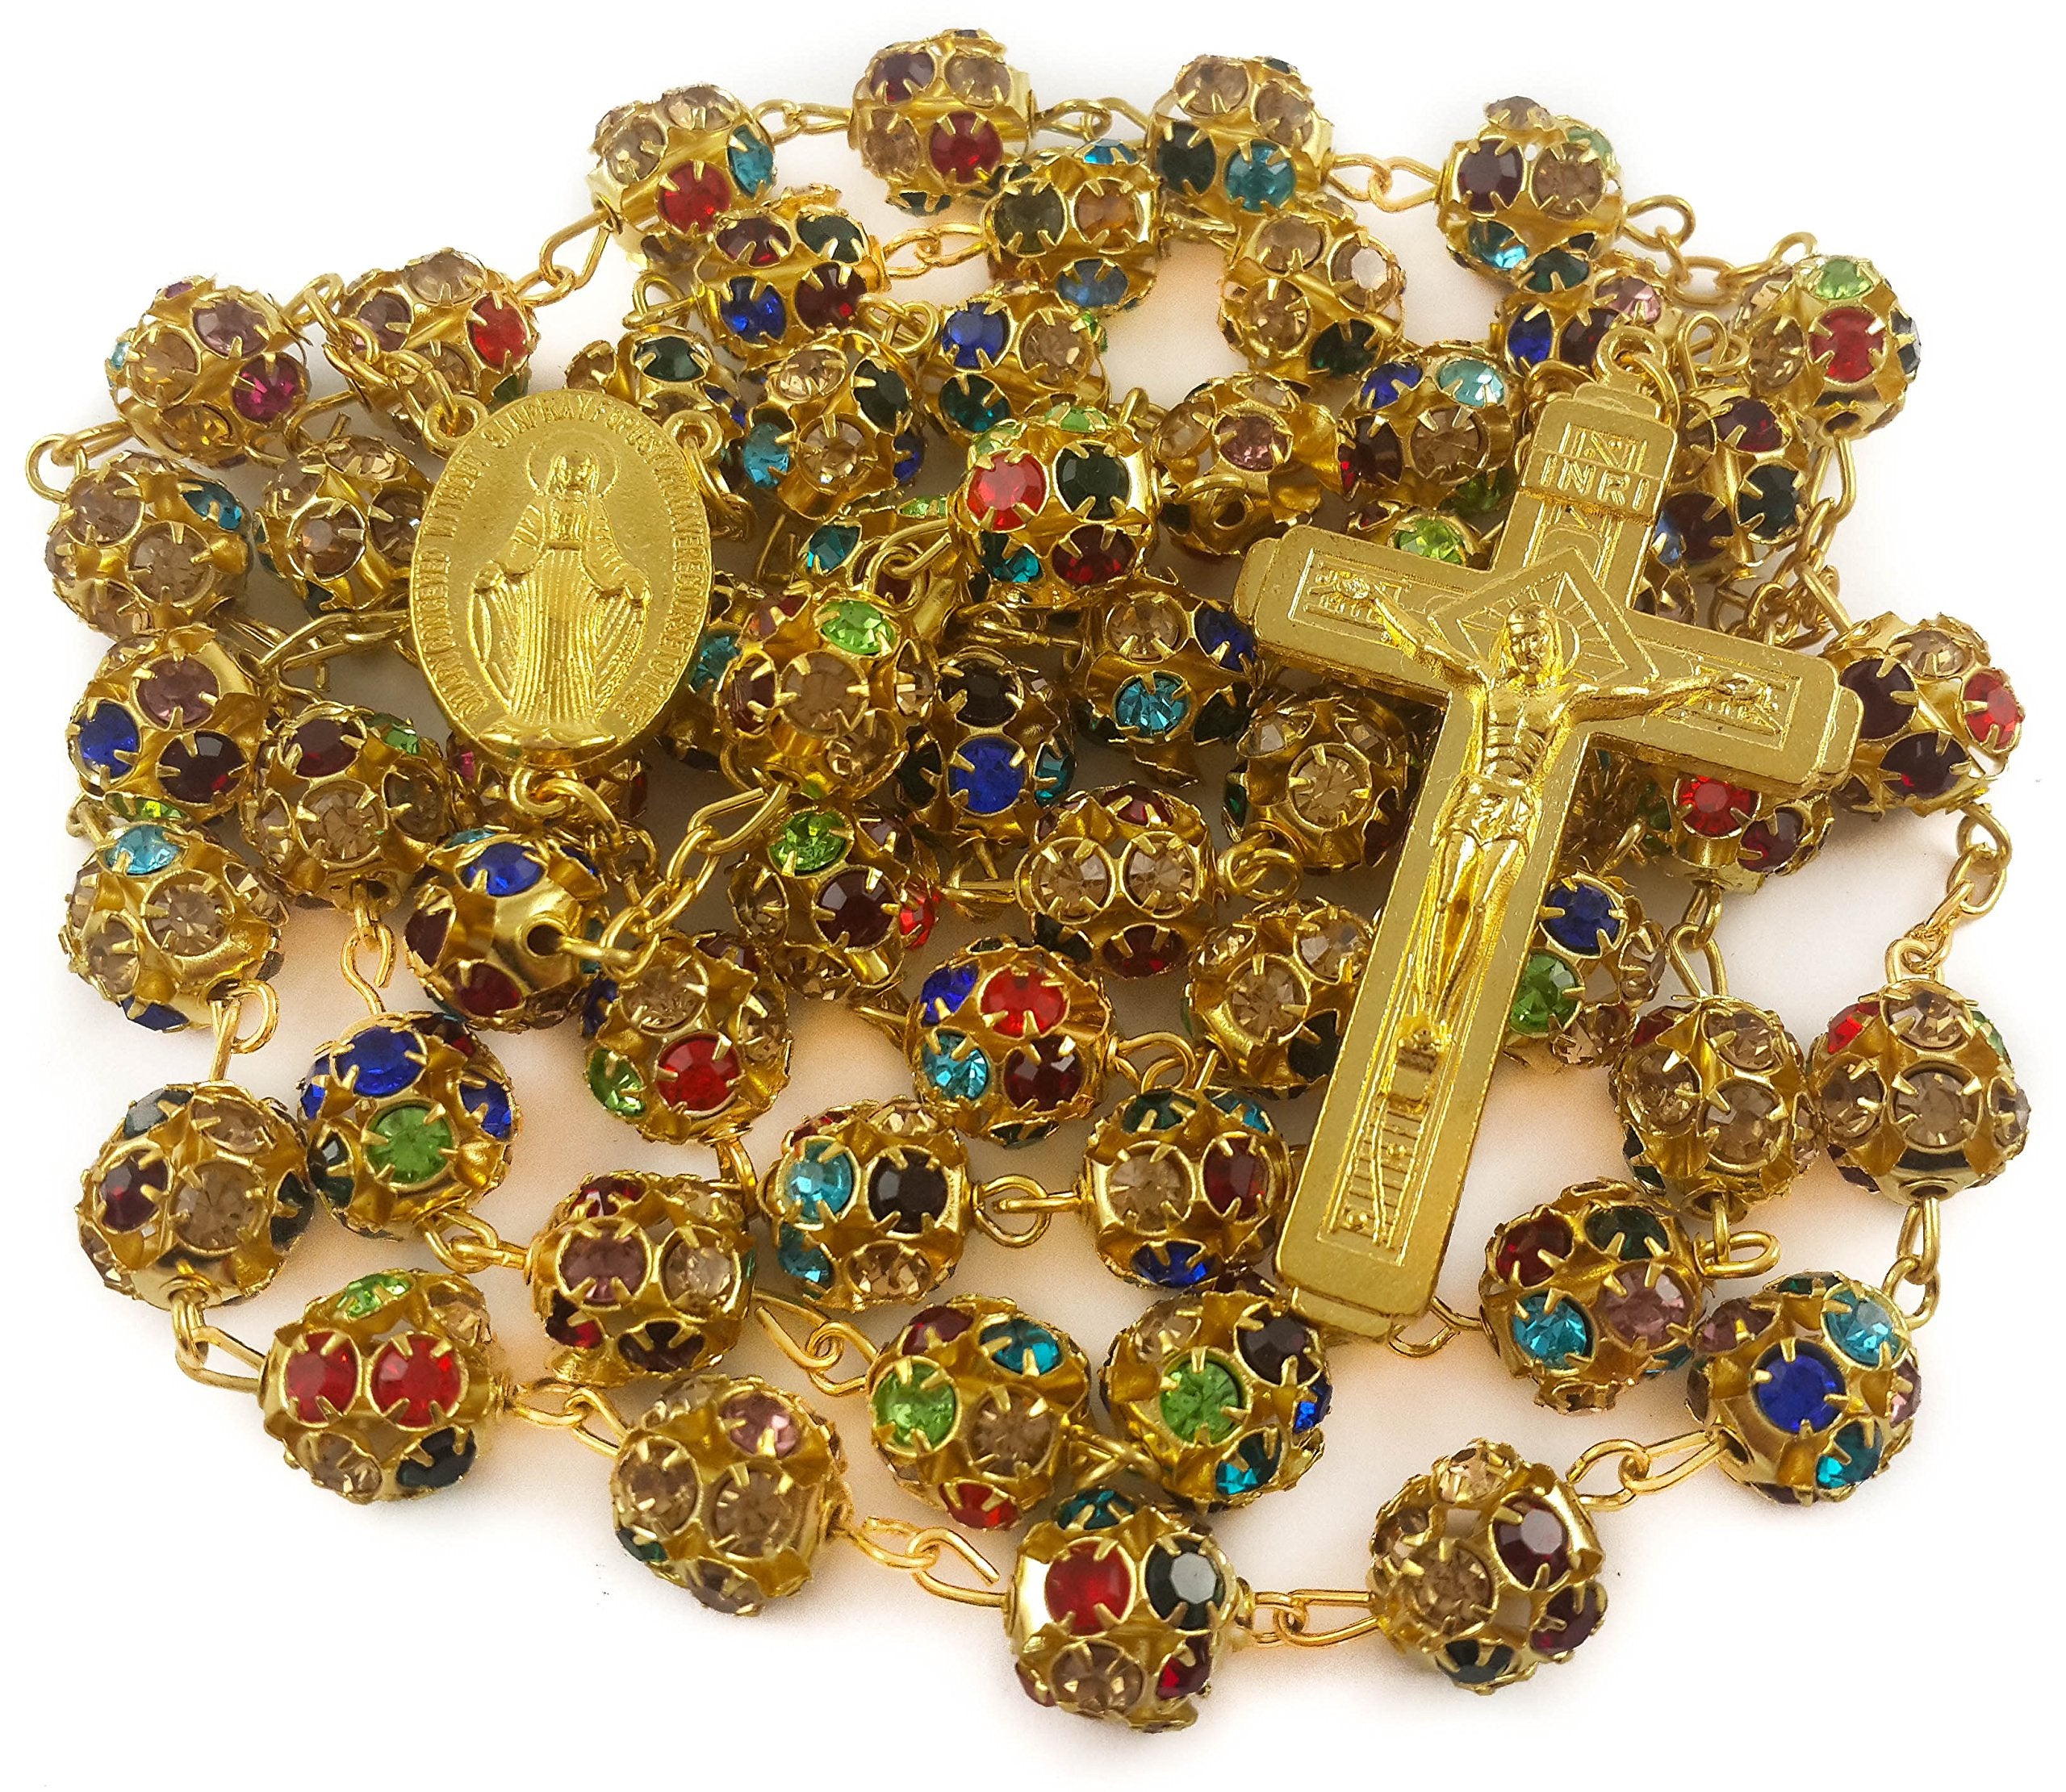 Nazareth Store Multicolor Crystal Zircon Beads Golden Rosary Catholic Colorful Bead Necklace Miraculous Medal Cross, Velvet Bag Case